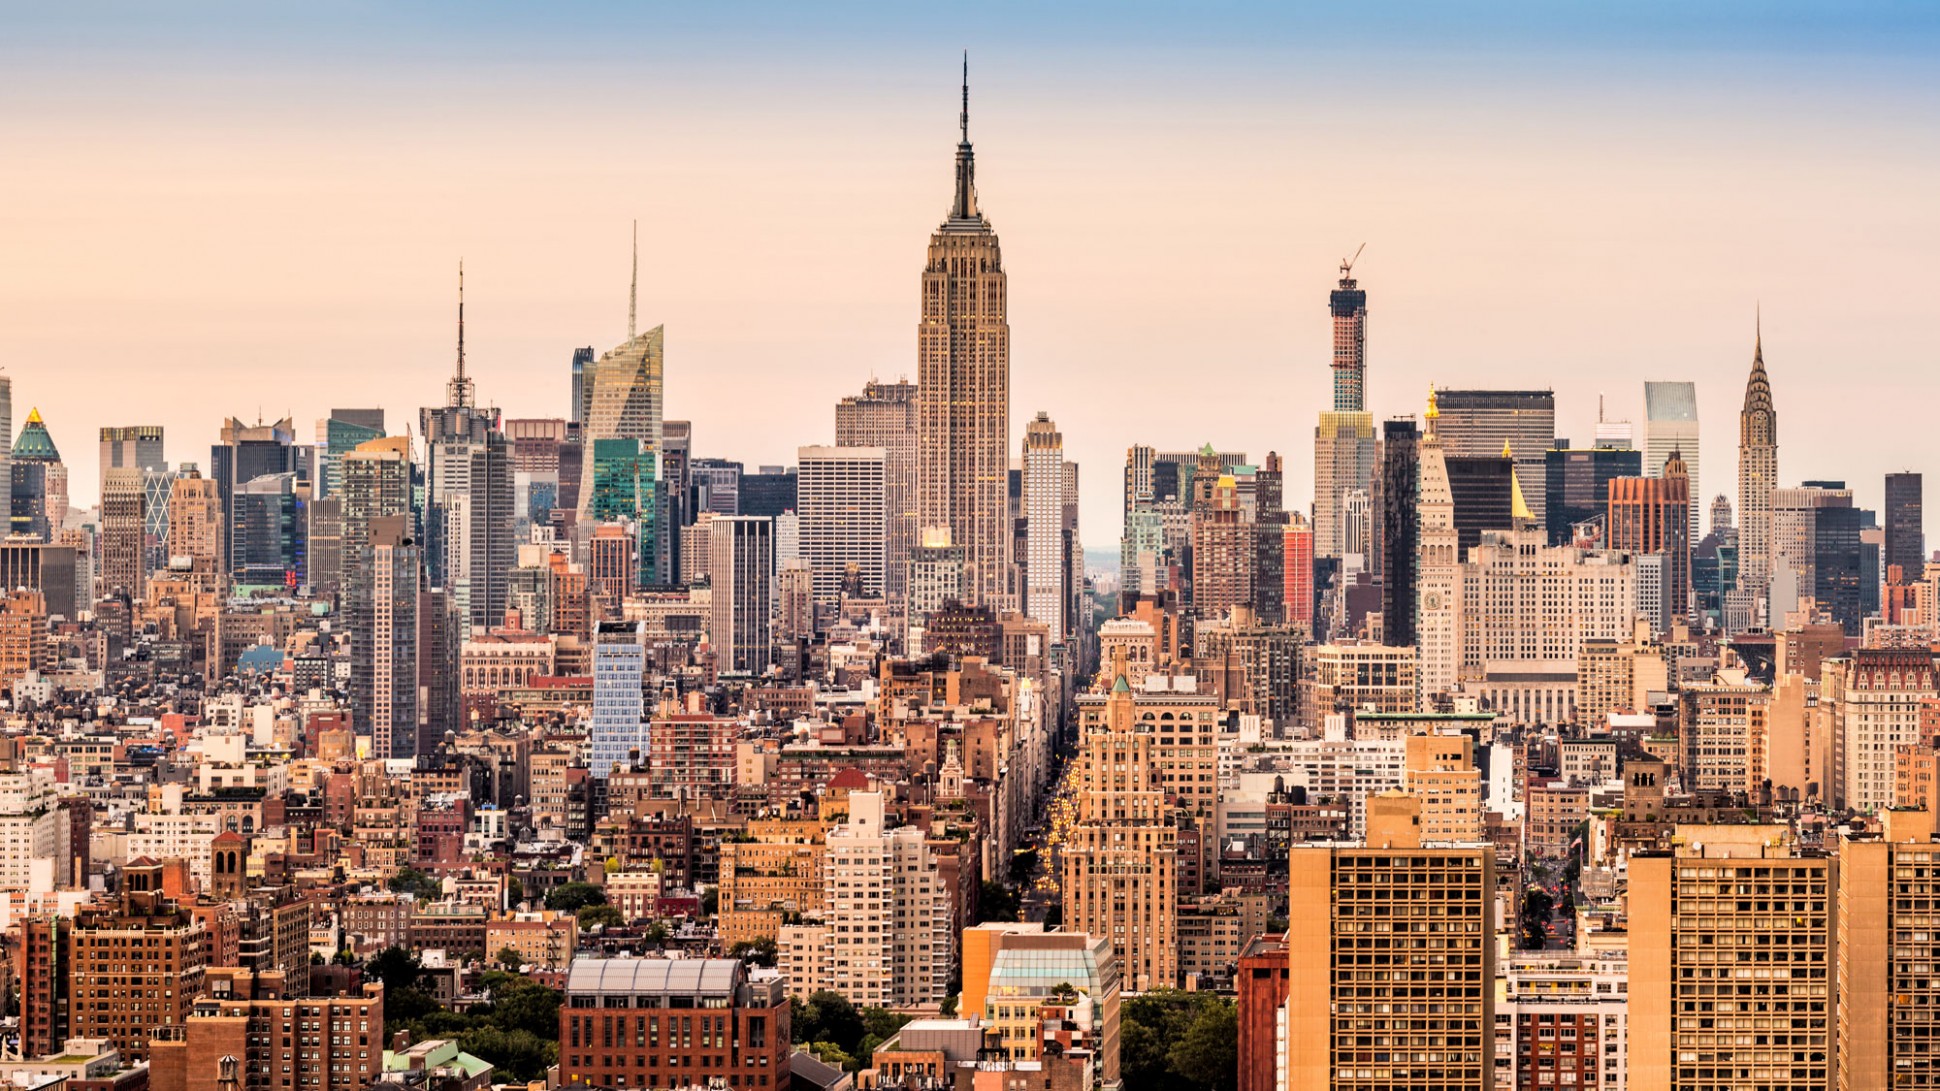 London falls, New York climbs up to being the most expensive city in